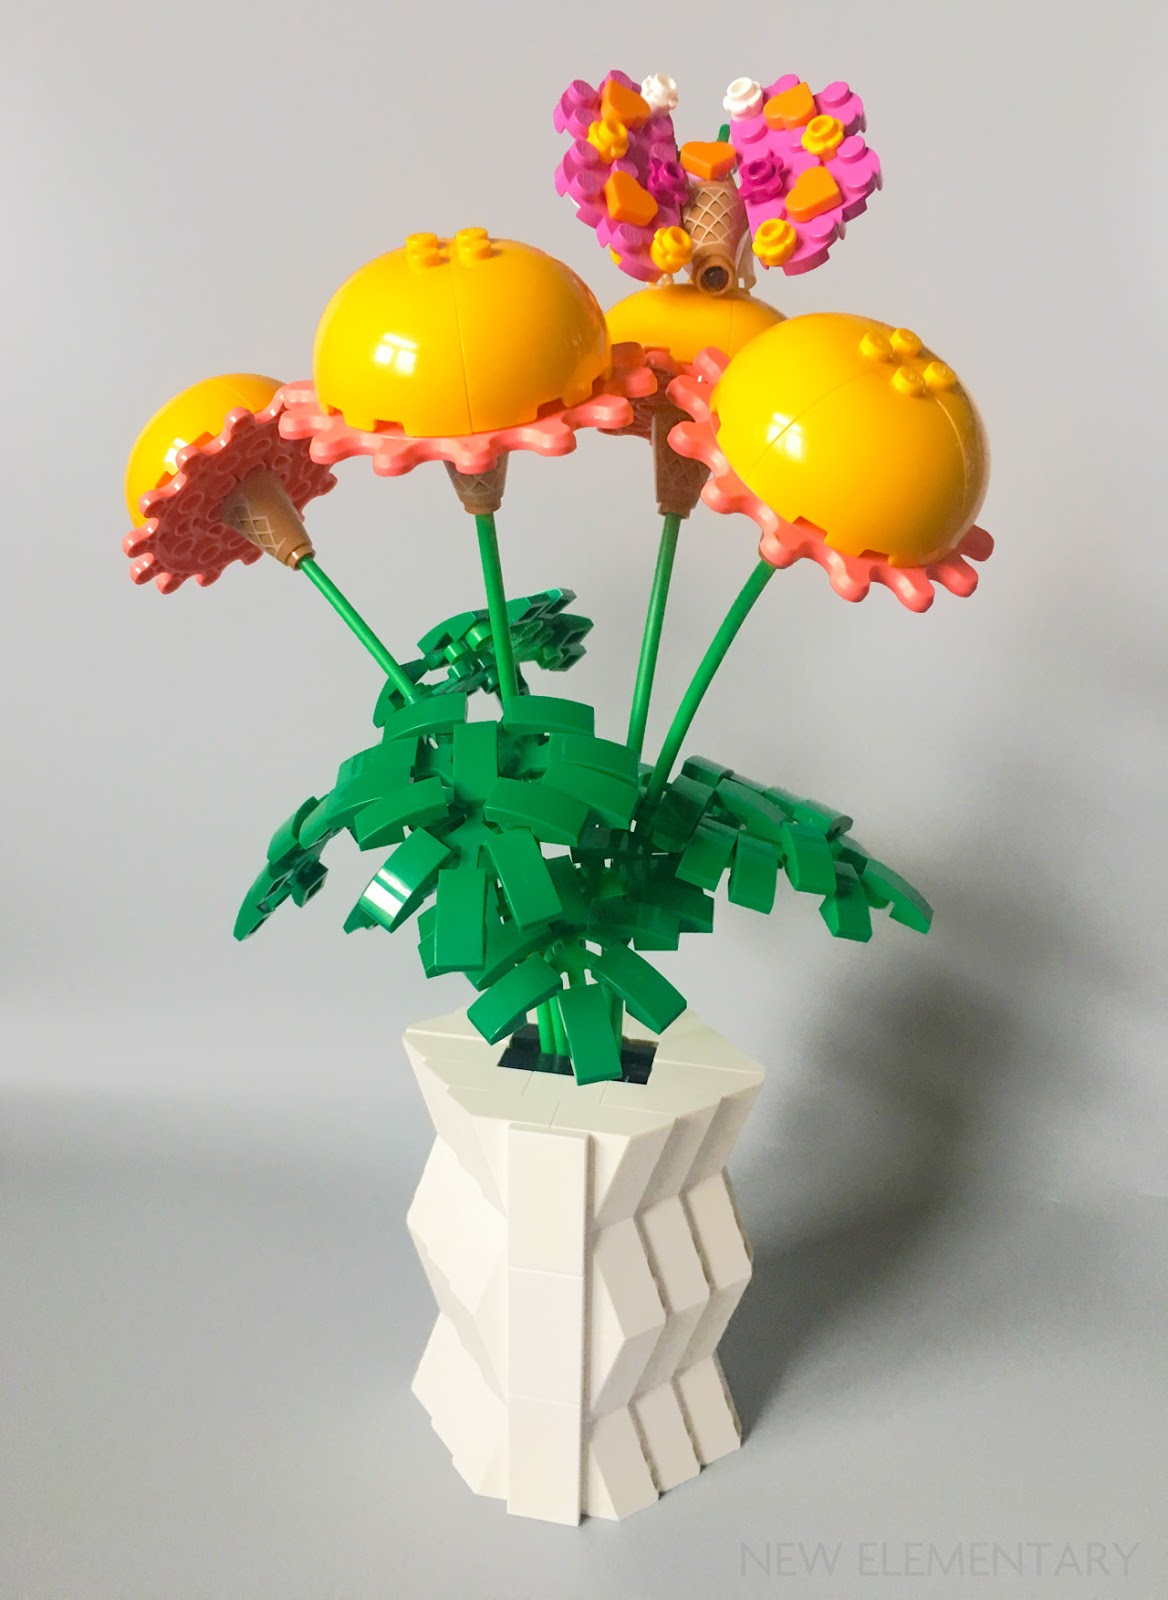 2019 Parts Fest #1: Jarekwally's flowers, vase and butterfly